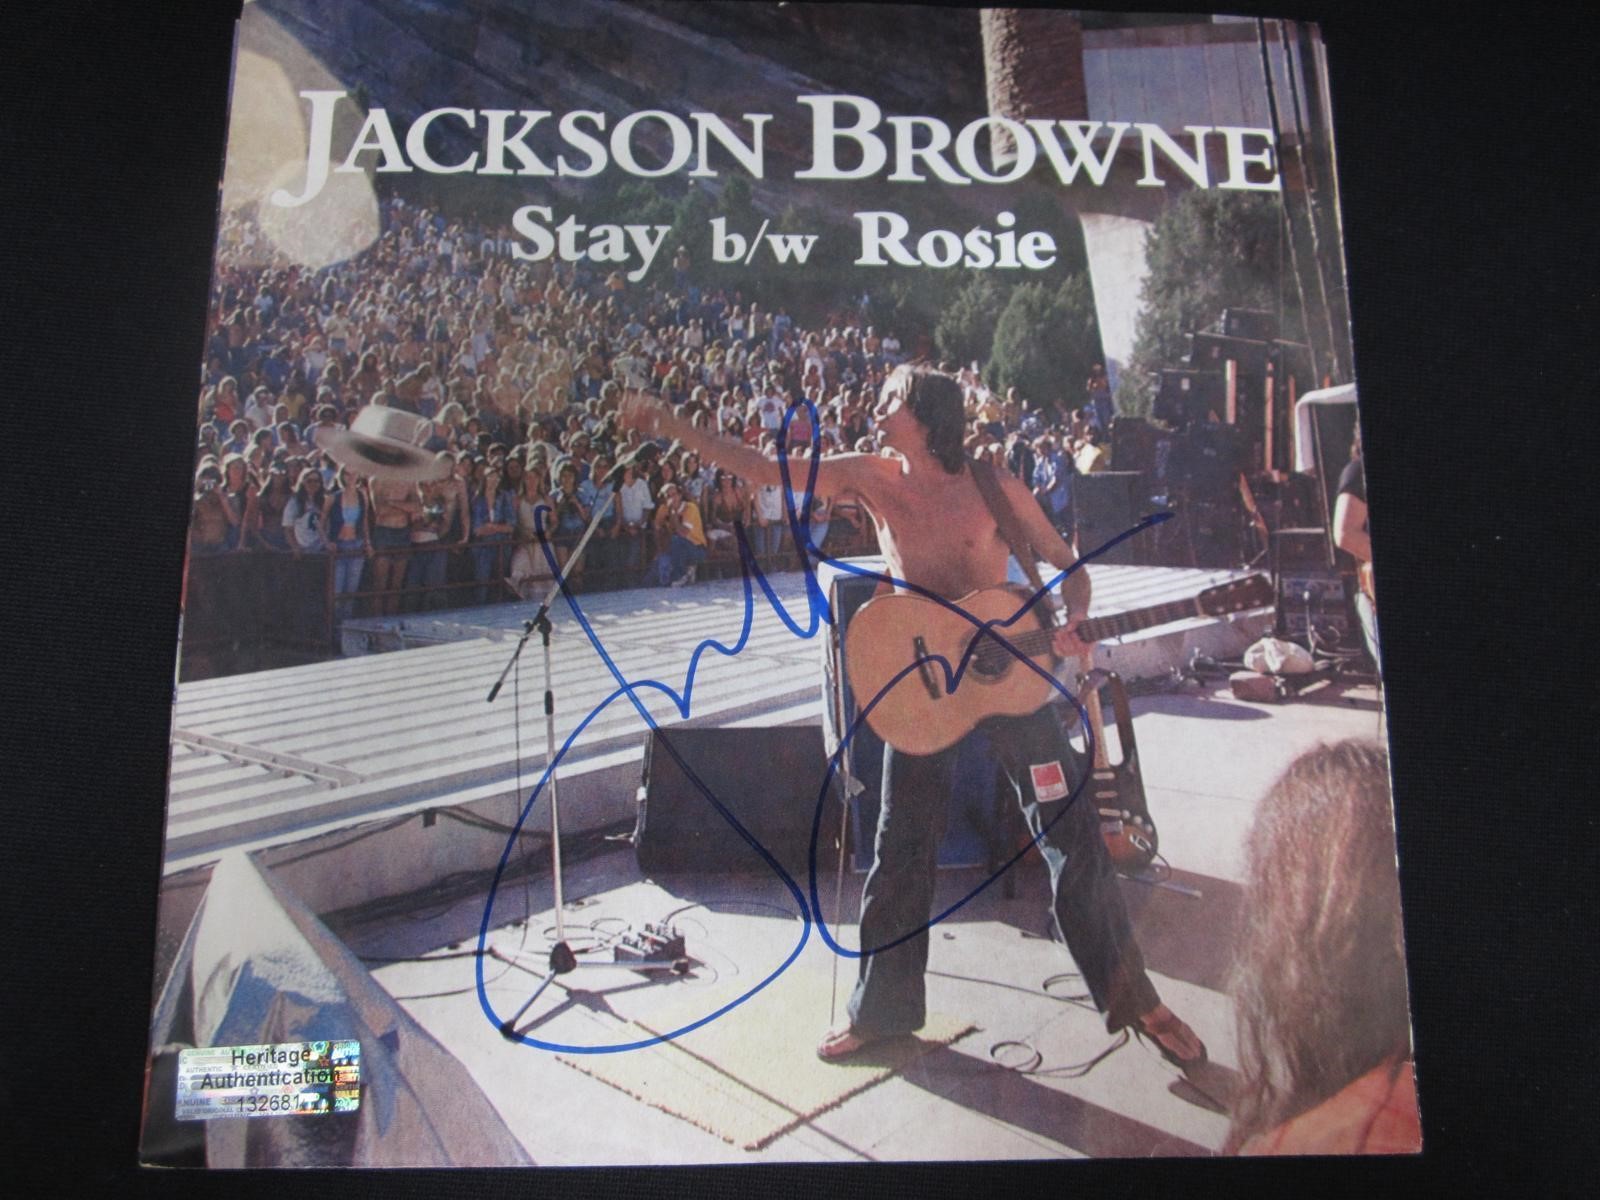 JACKSON BROWNE SIGNED ALBUM COVER WITH COA